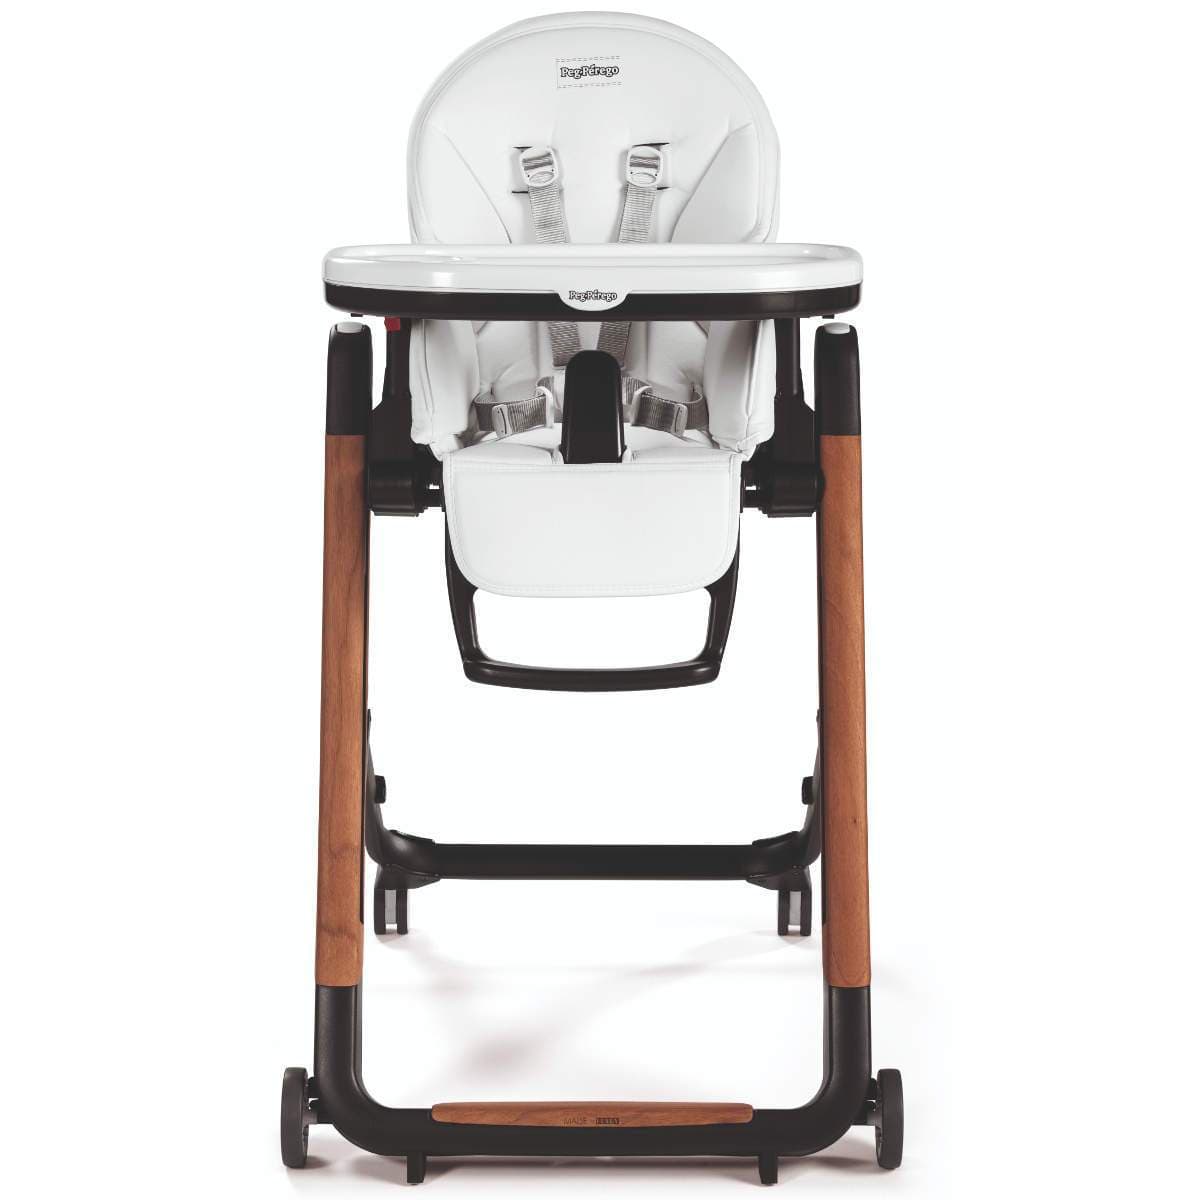 Peg Perego High Chairs & Boosters Peg Perego Siesta Ambiance High Chair